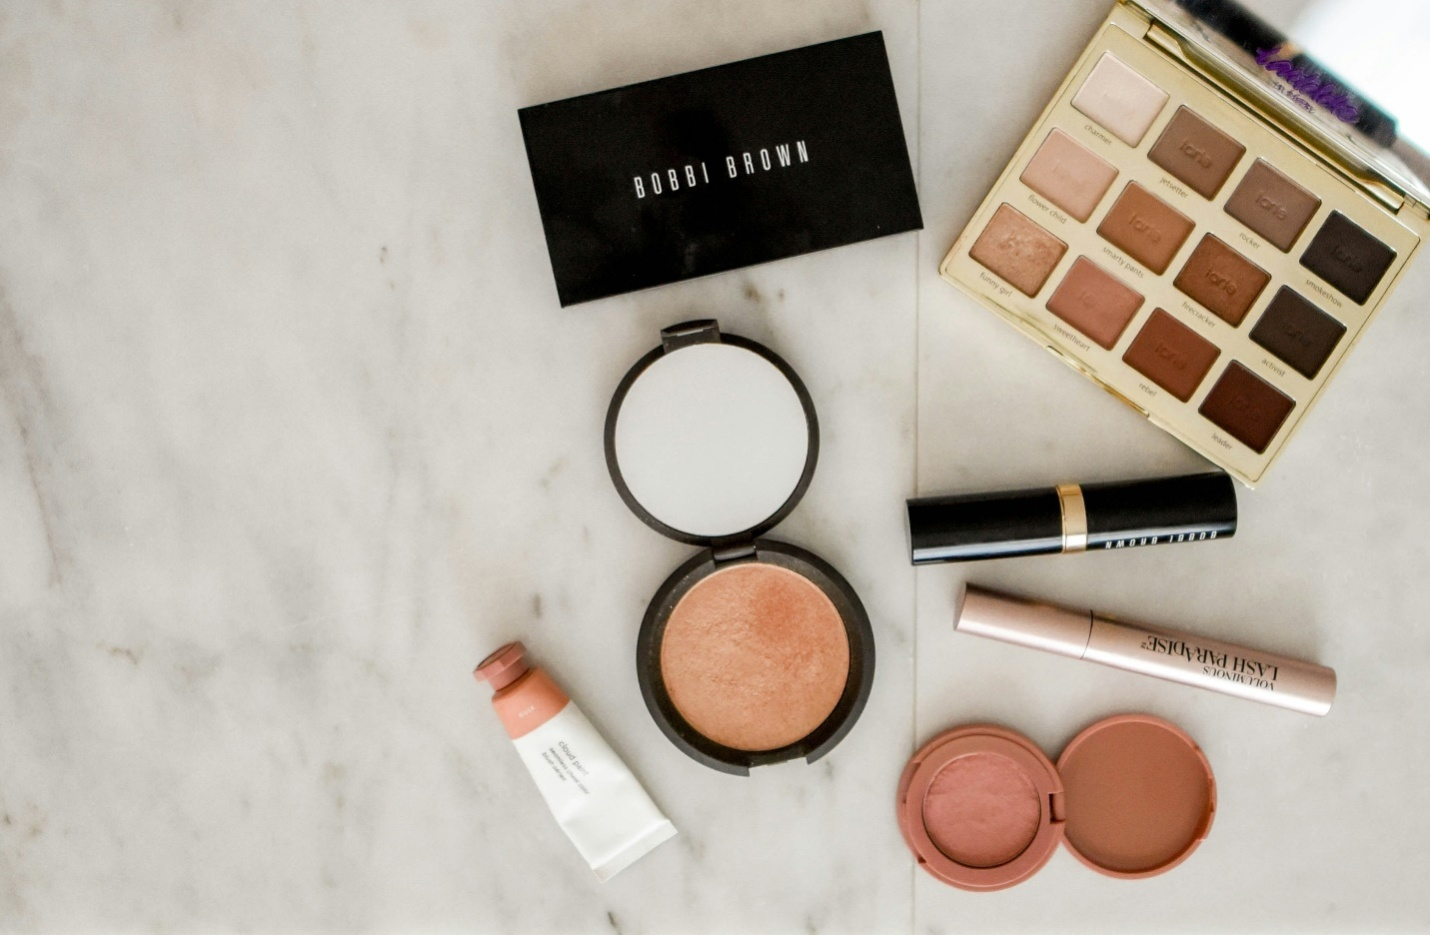  A makeup palette with neutral shades, a black Bobbi Brown box, an open blush case with a mirror, along with a lipstick, concealer pen, tube, and lip color case, arranged on a white and grey marble surface, showing that people tend to buy quality skincare products when it comes to makeup.